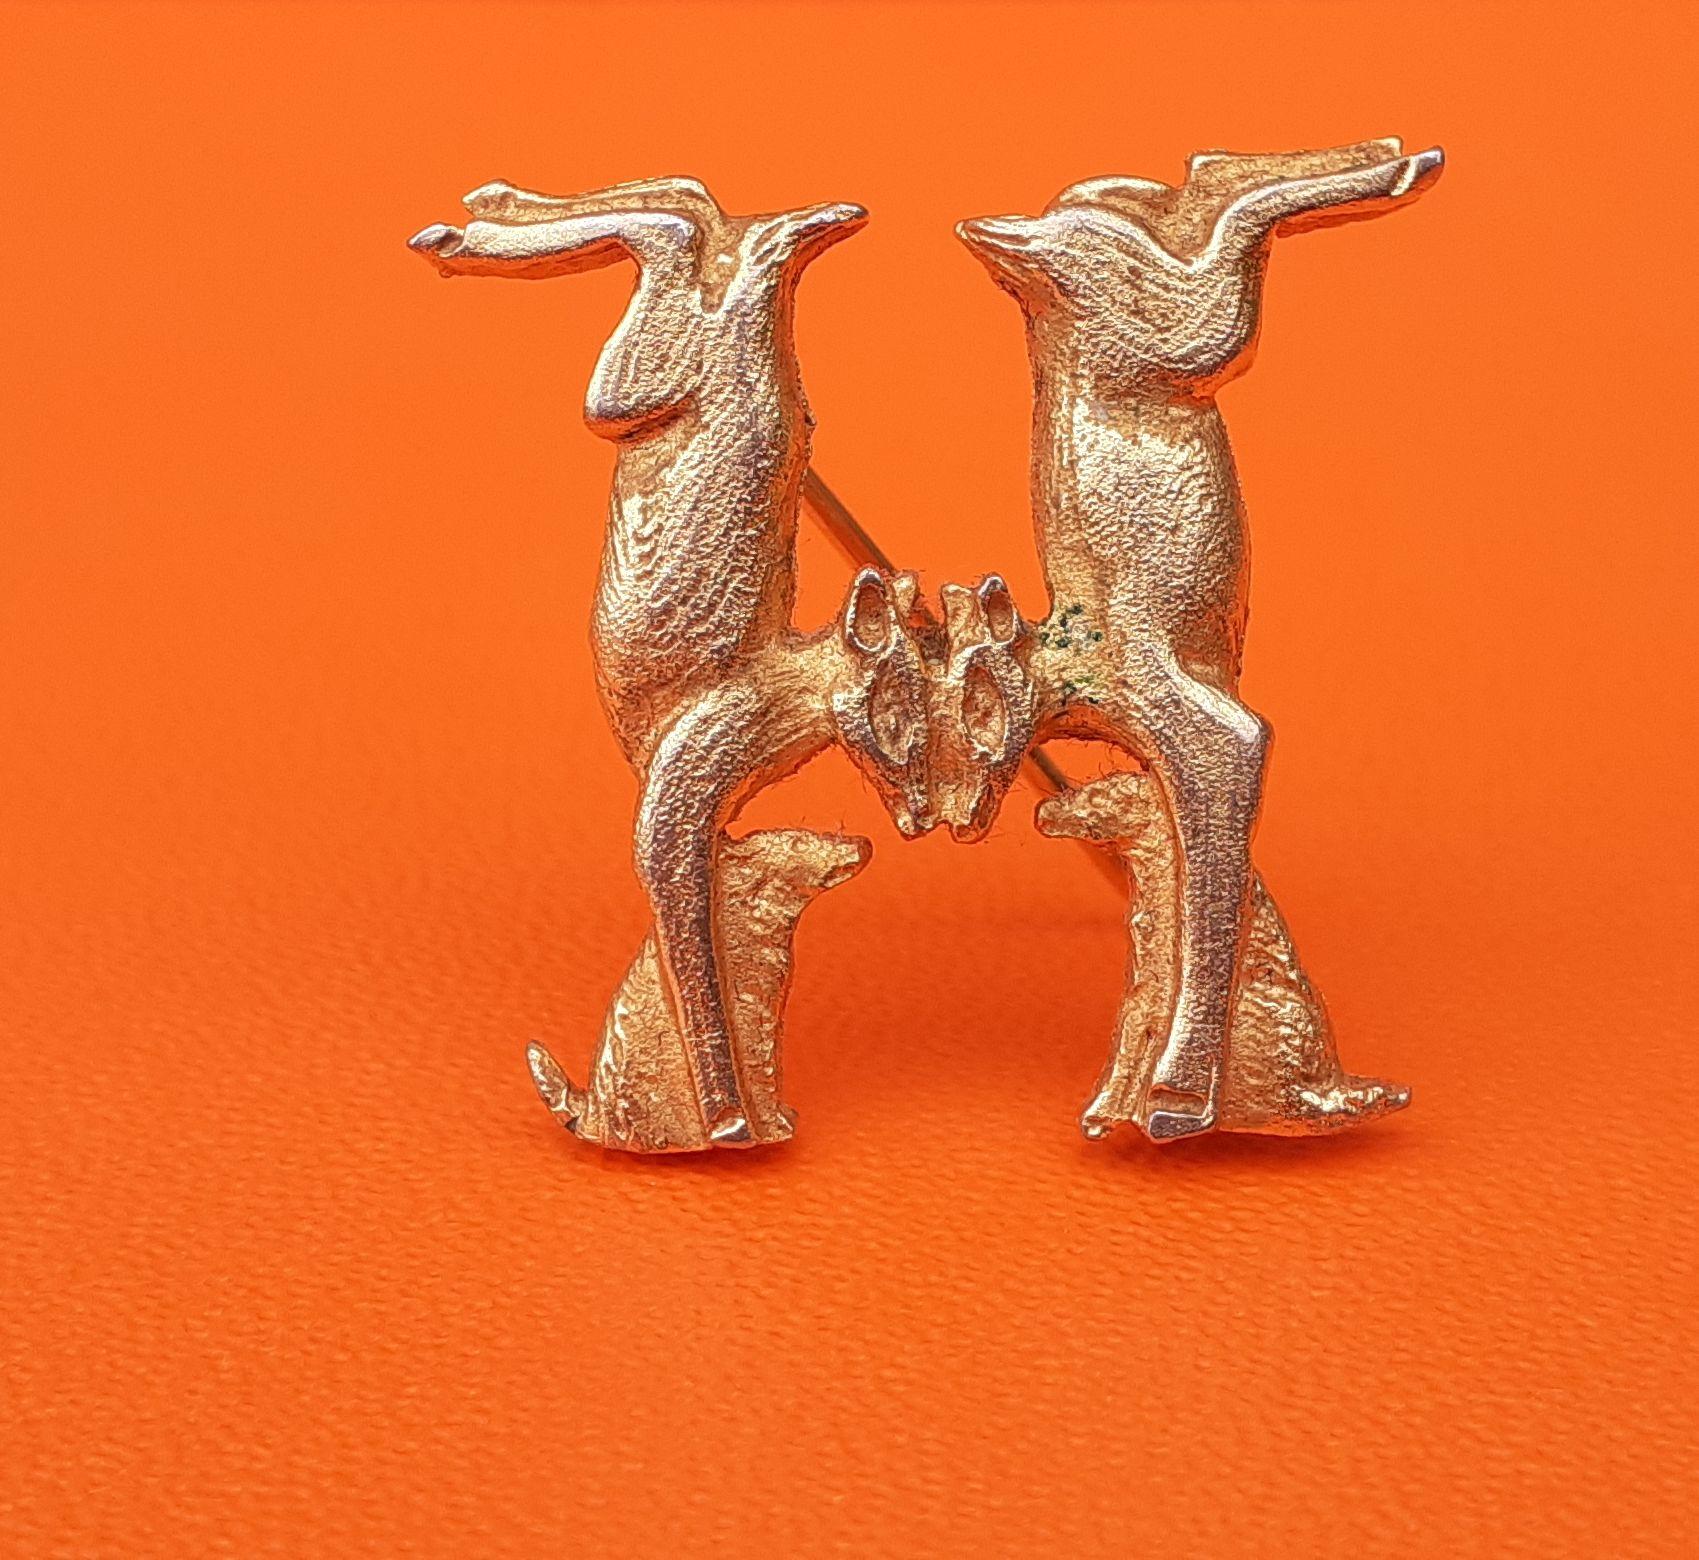 Beautiful Authentic Hermès Brooch

Pattern: dogs and hinds forming an H

We can find this pattern on the Hermès Scarf called 